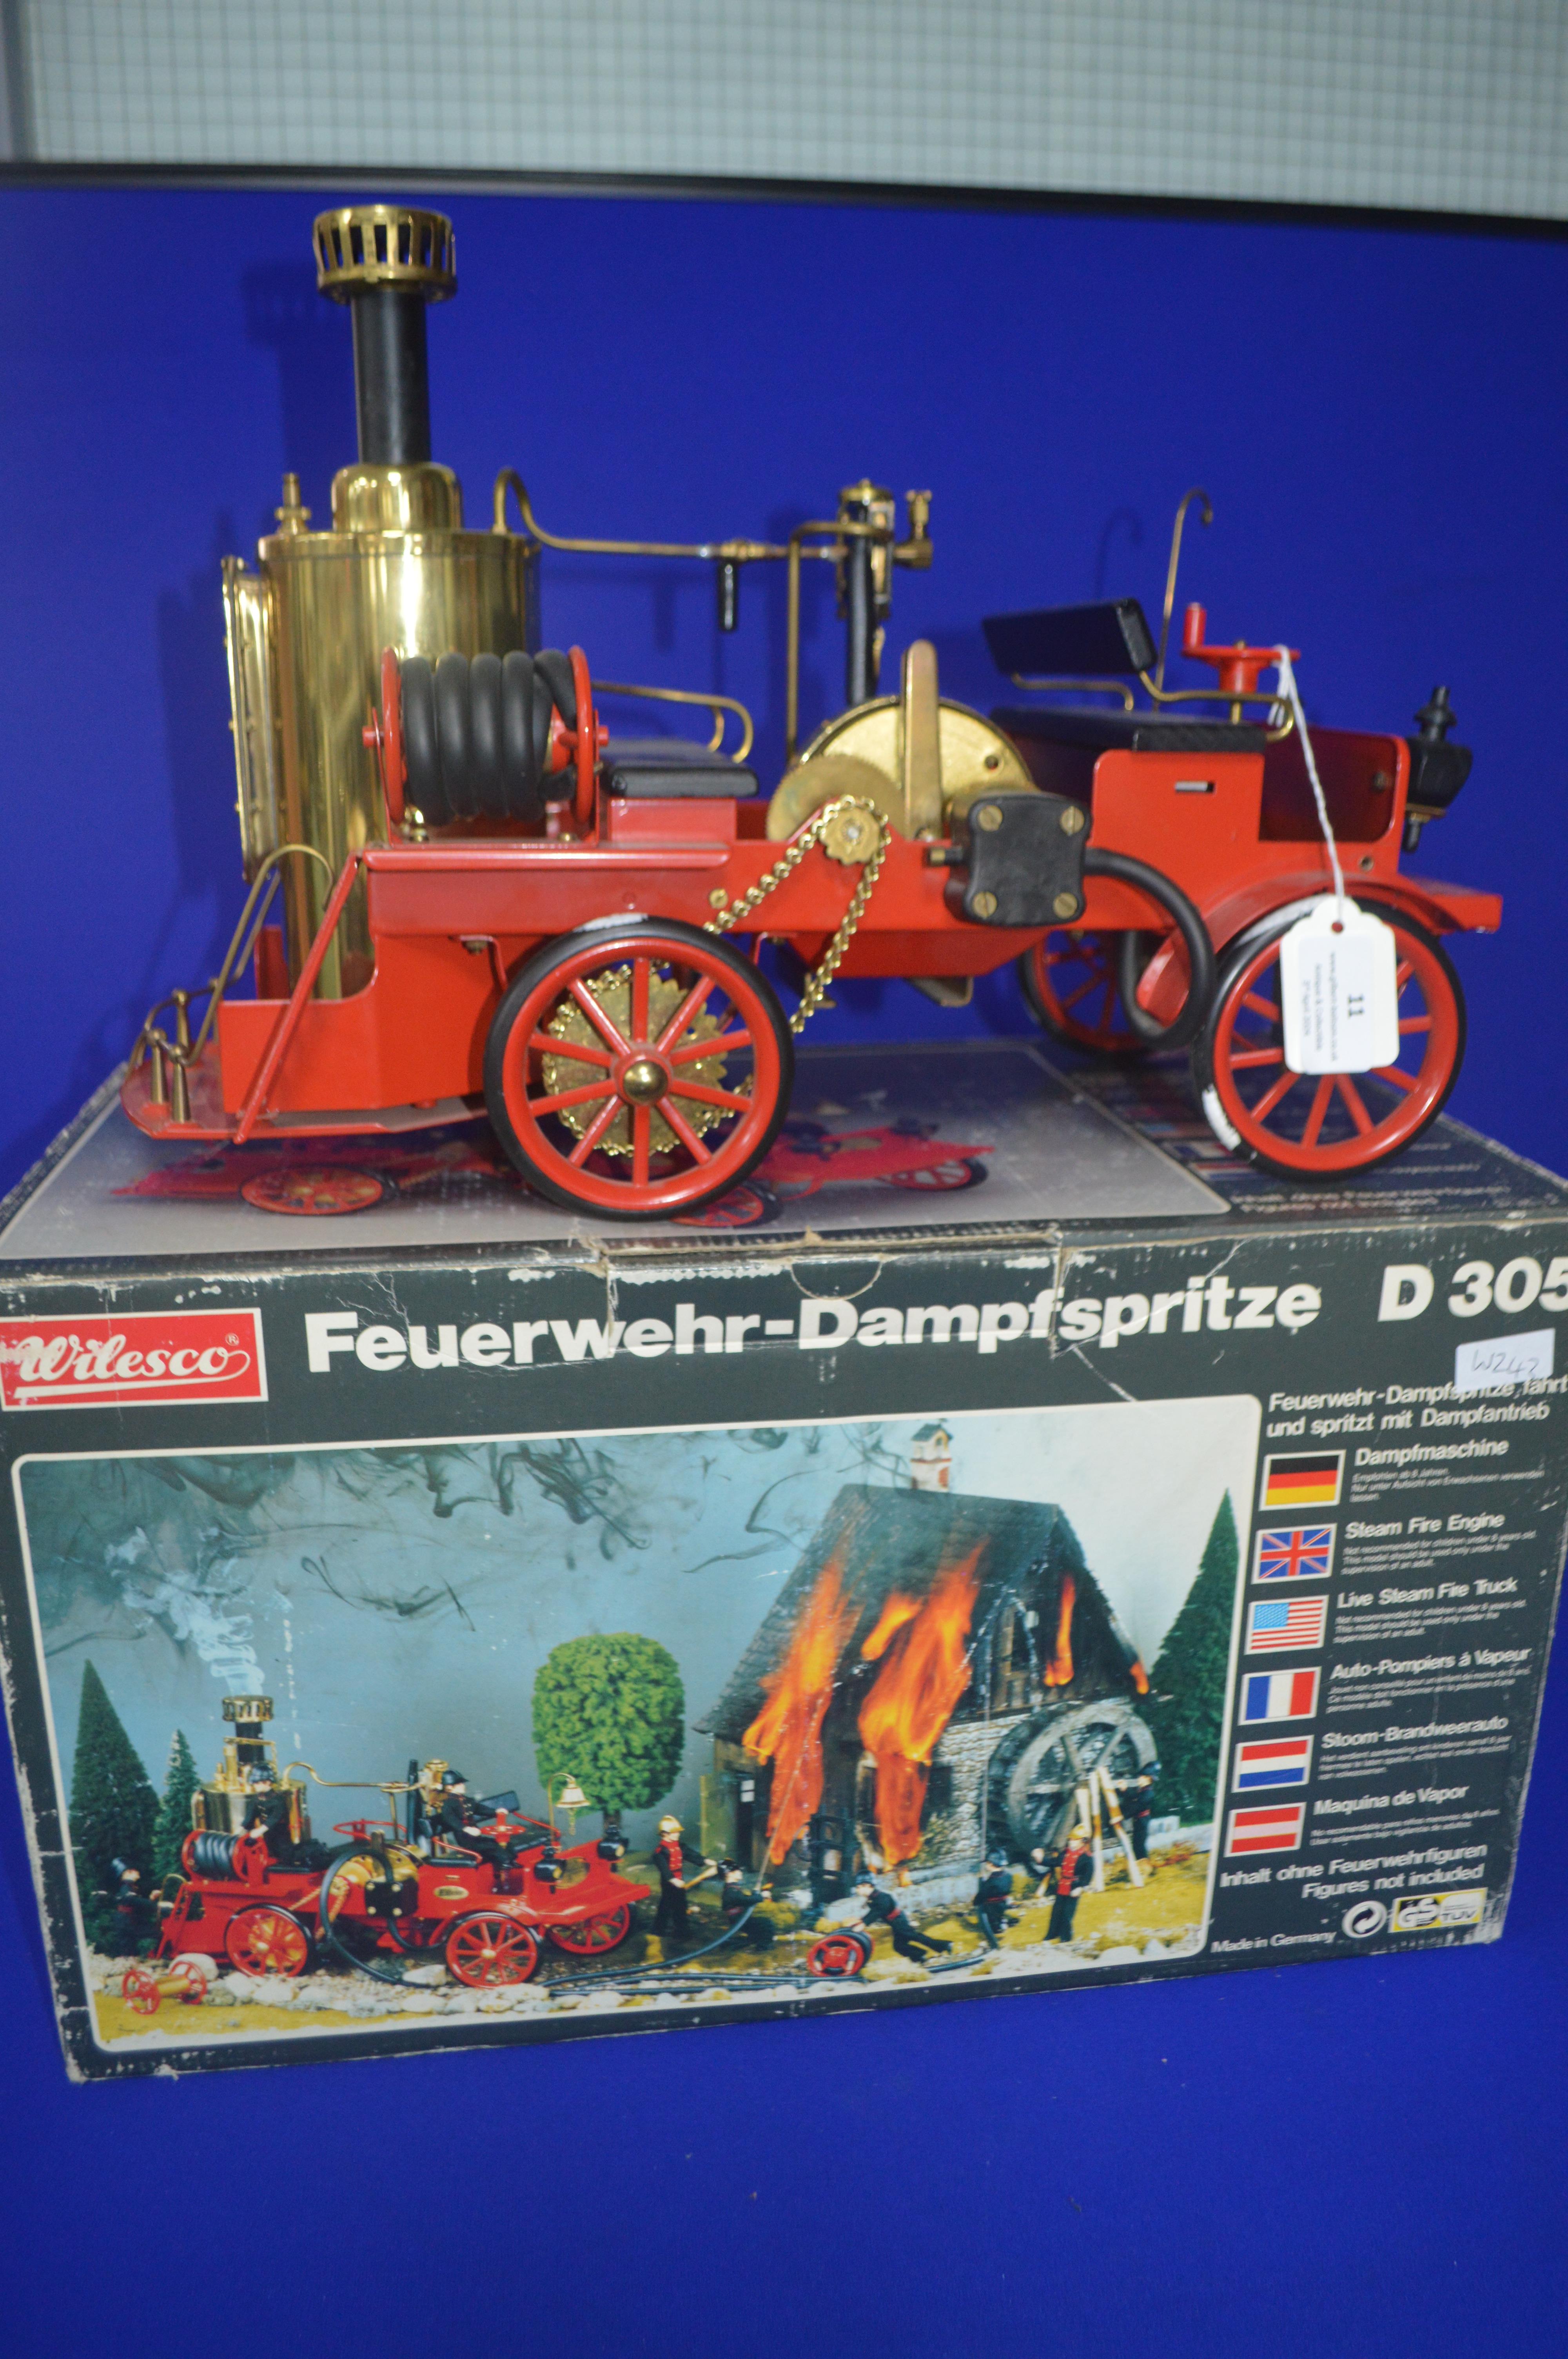 Wilesco D305 Model Live Steam Fire Engine with Original Packaging